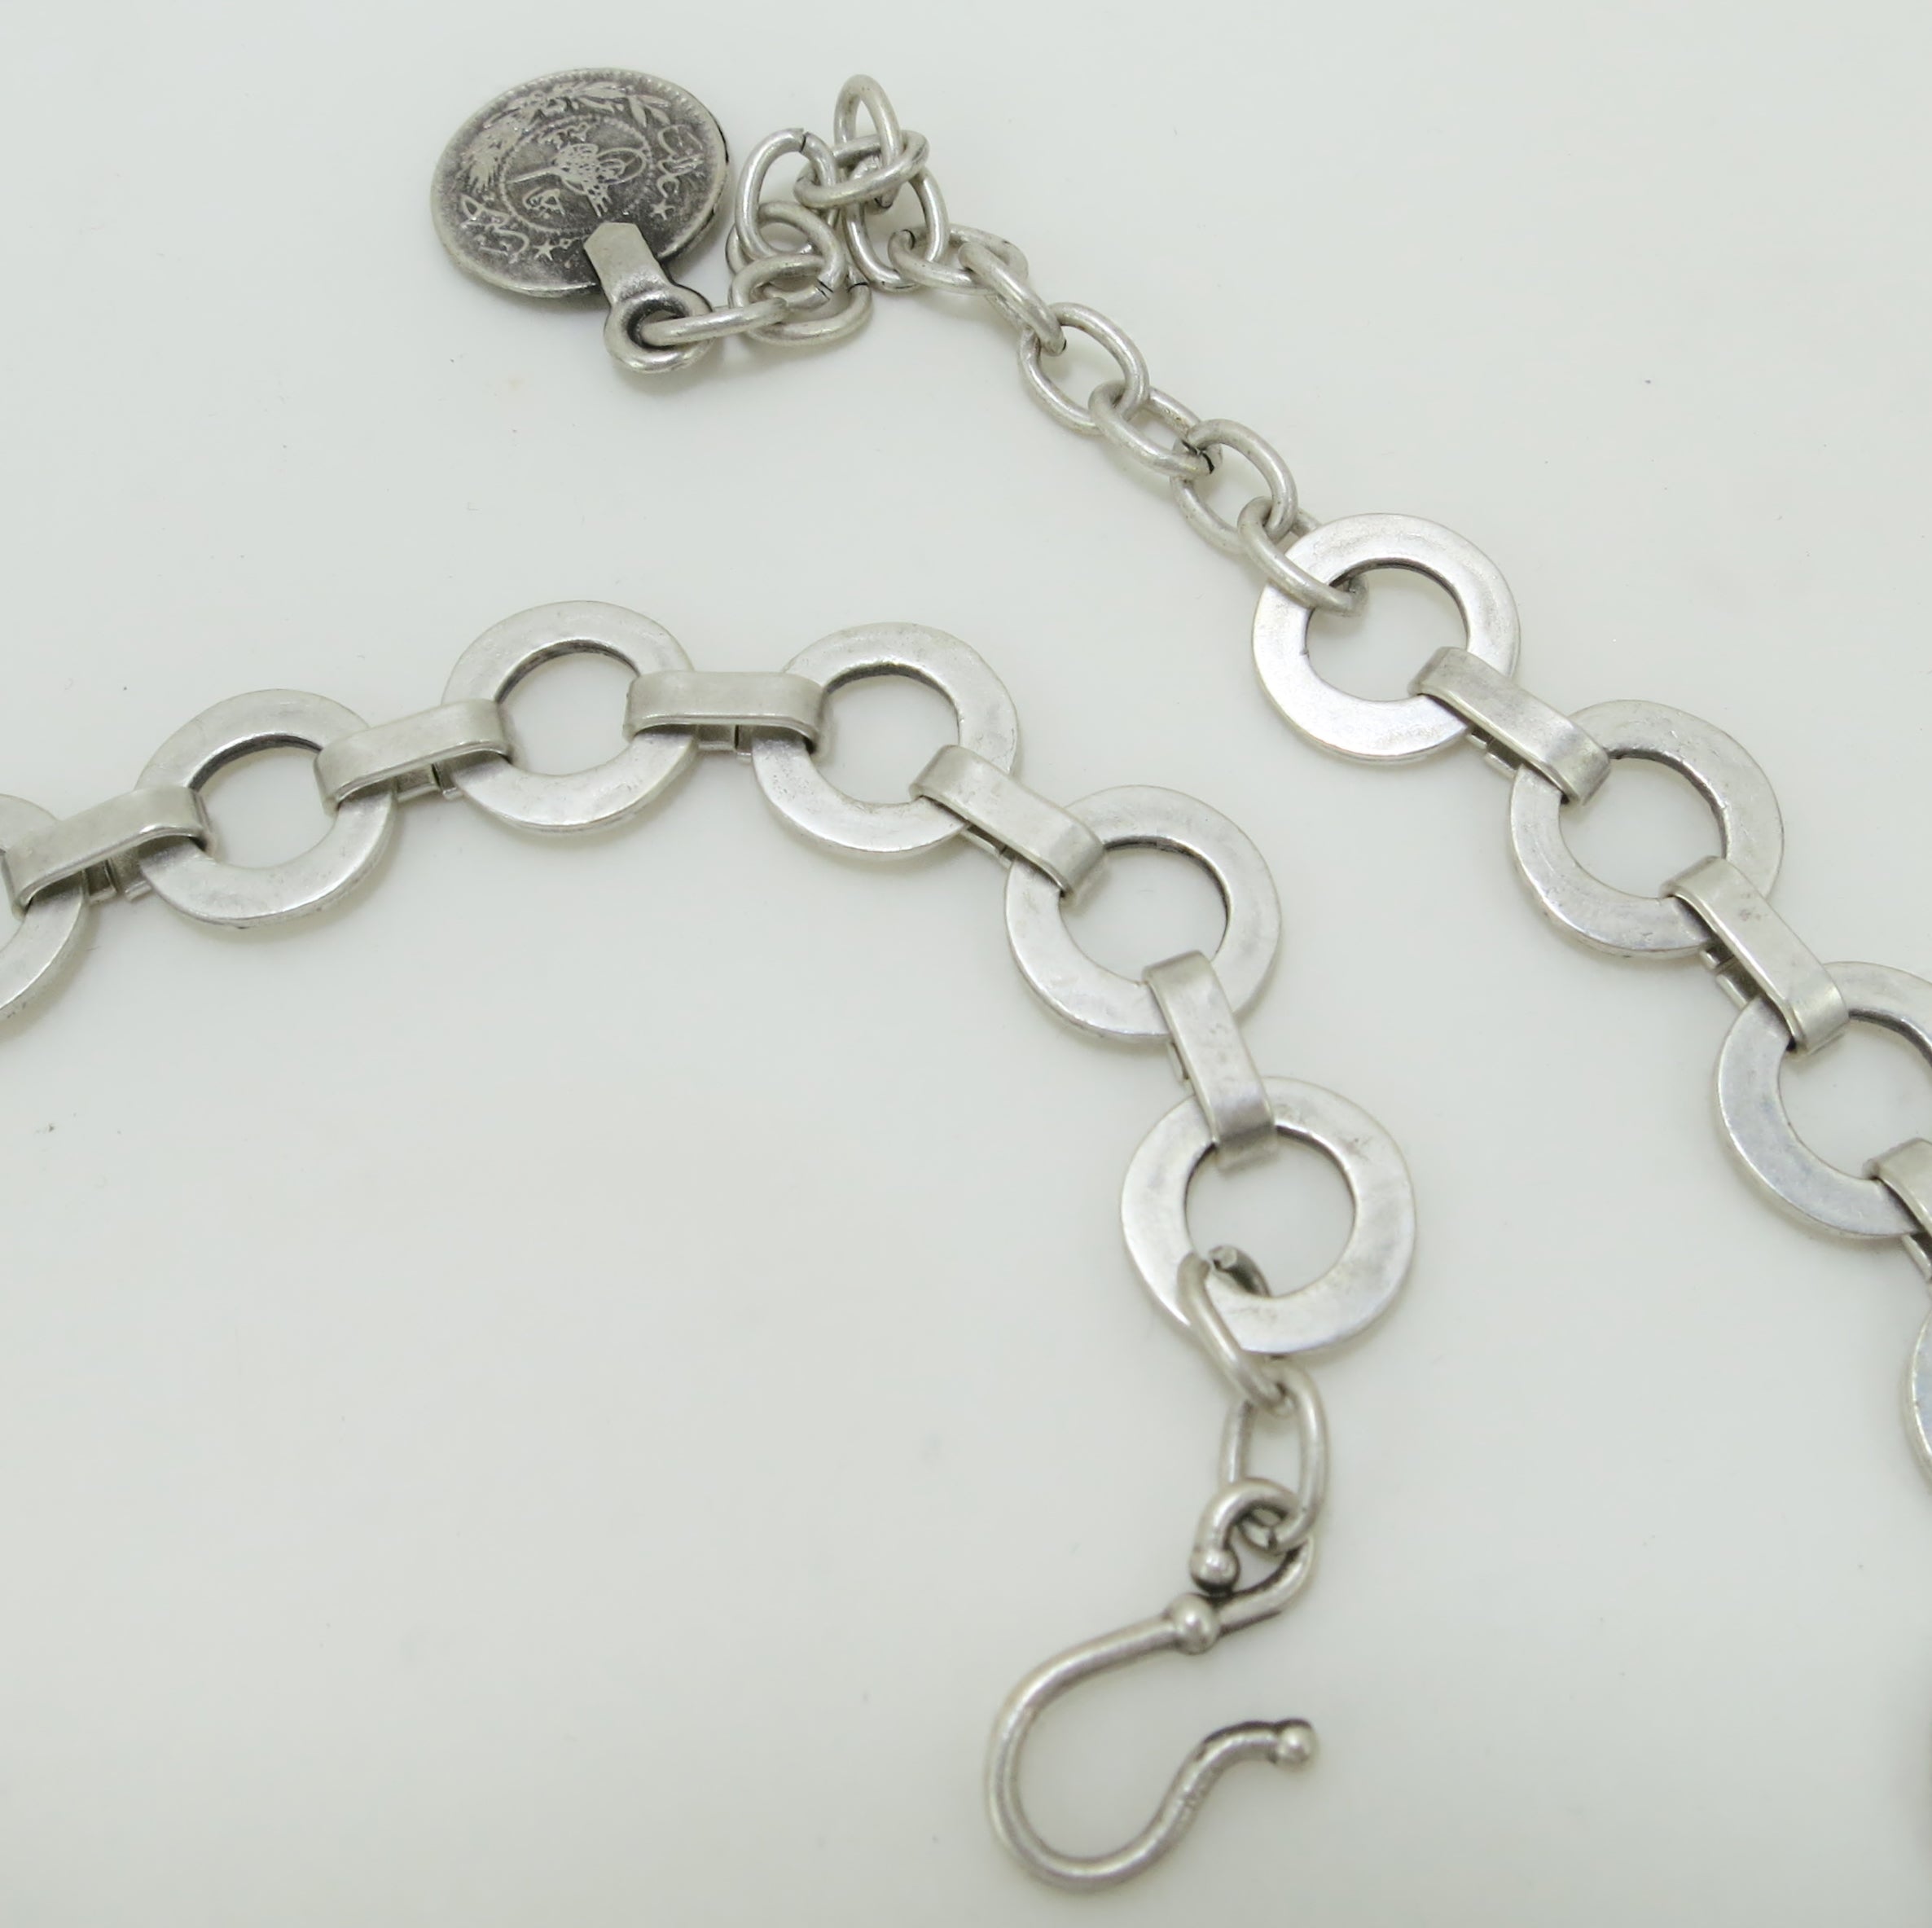 Pewter chain mail  necklace by Chanour